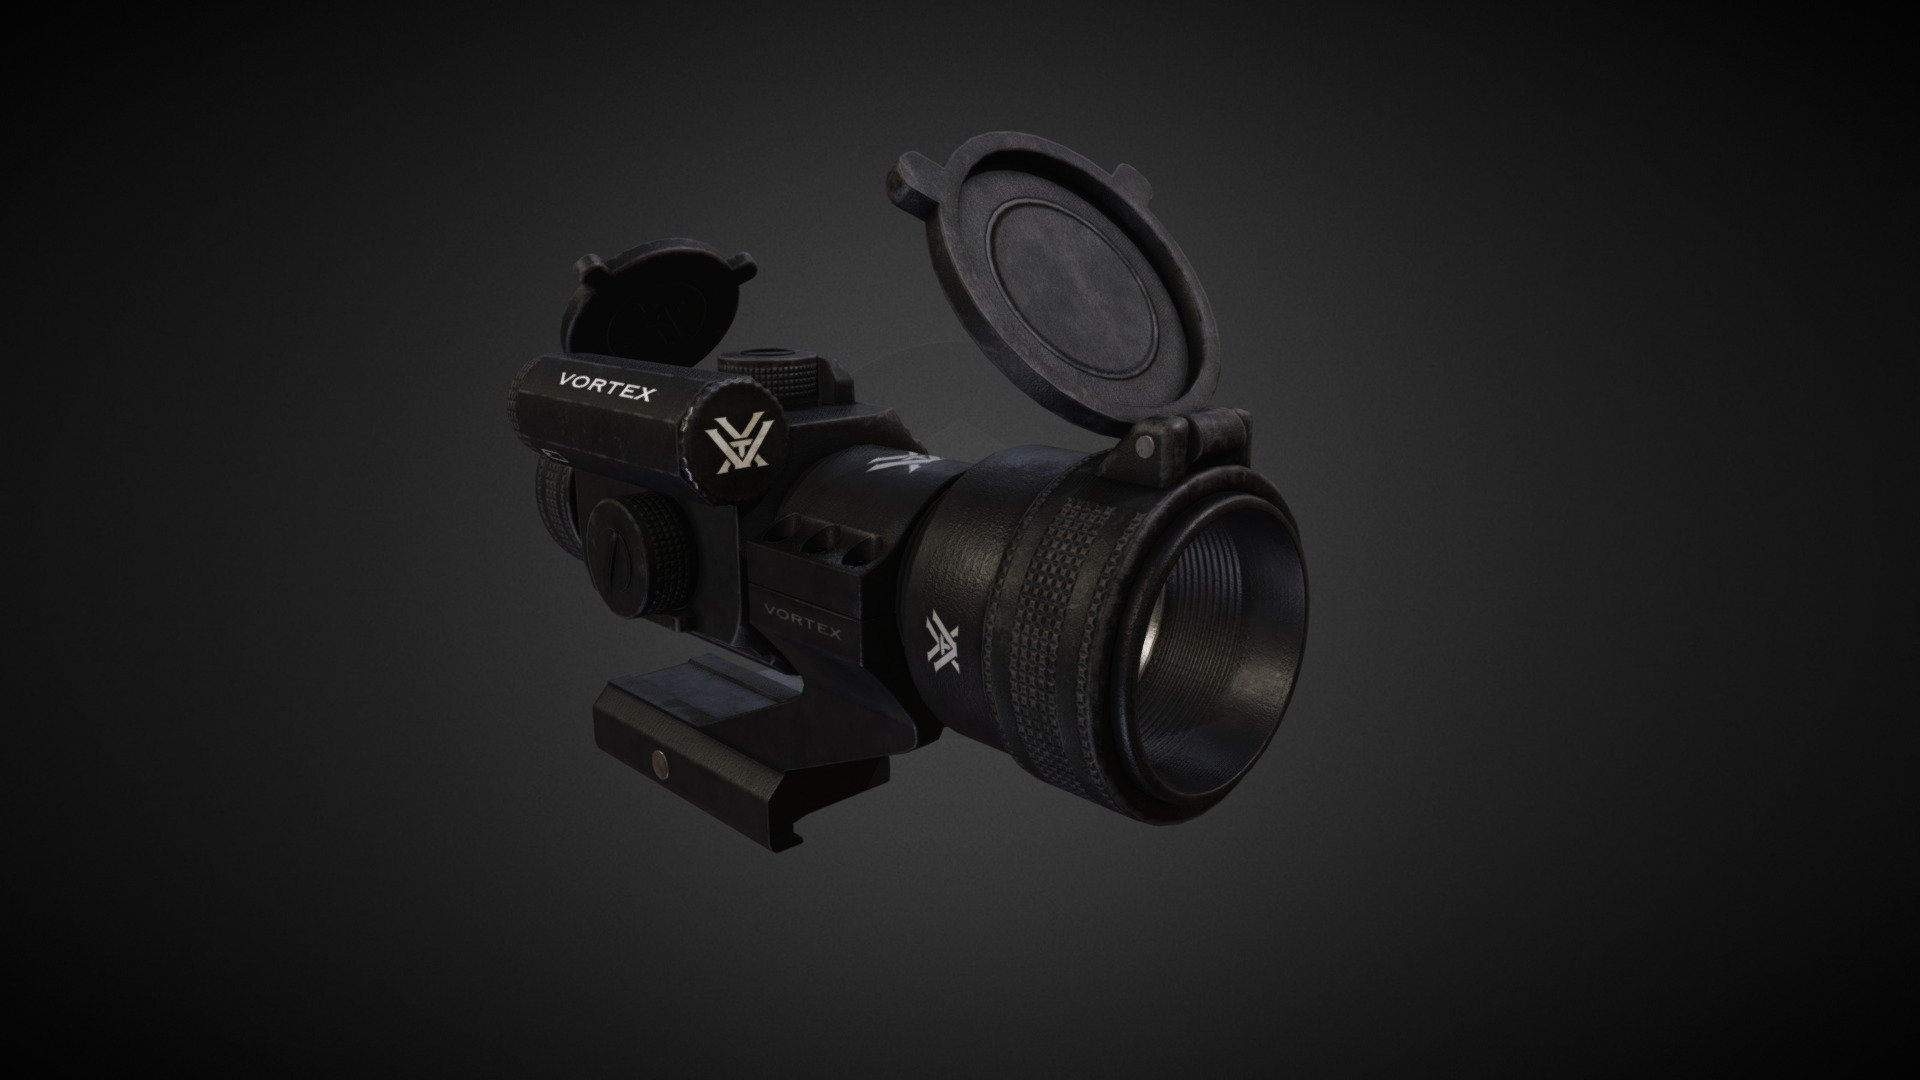 Another cool optic by Vortex. This time I made StrikeFire 2 Red dot with 30mm tube design ideal of AR platform. Optic dont have magnification, but still its perfect chose for quick target acquisition.

Model is Game ready. Low poly. 

One mine material with 4k texture and one for lense and dot.

Made with Blender 3d model